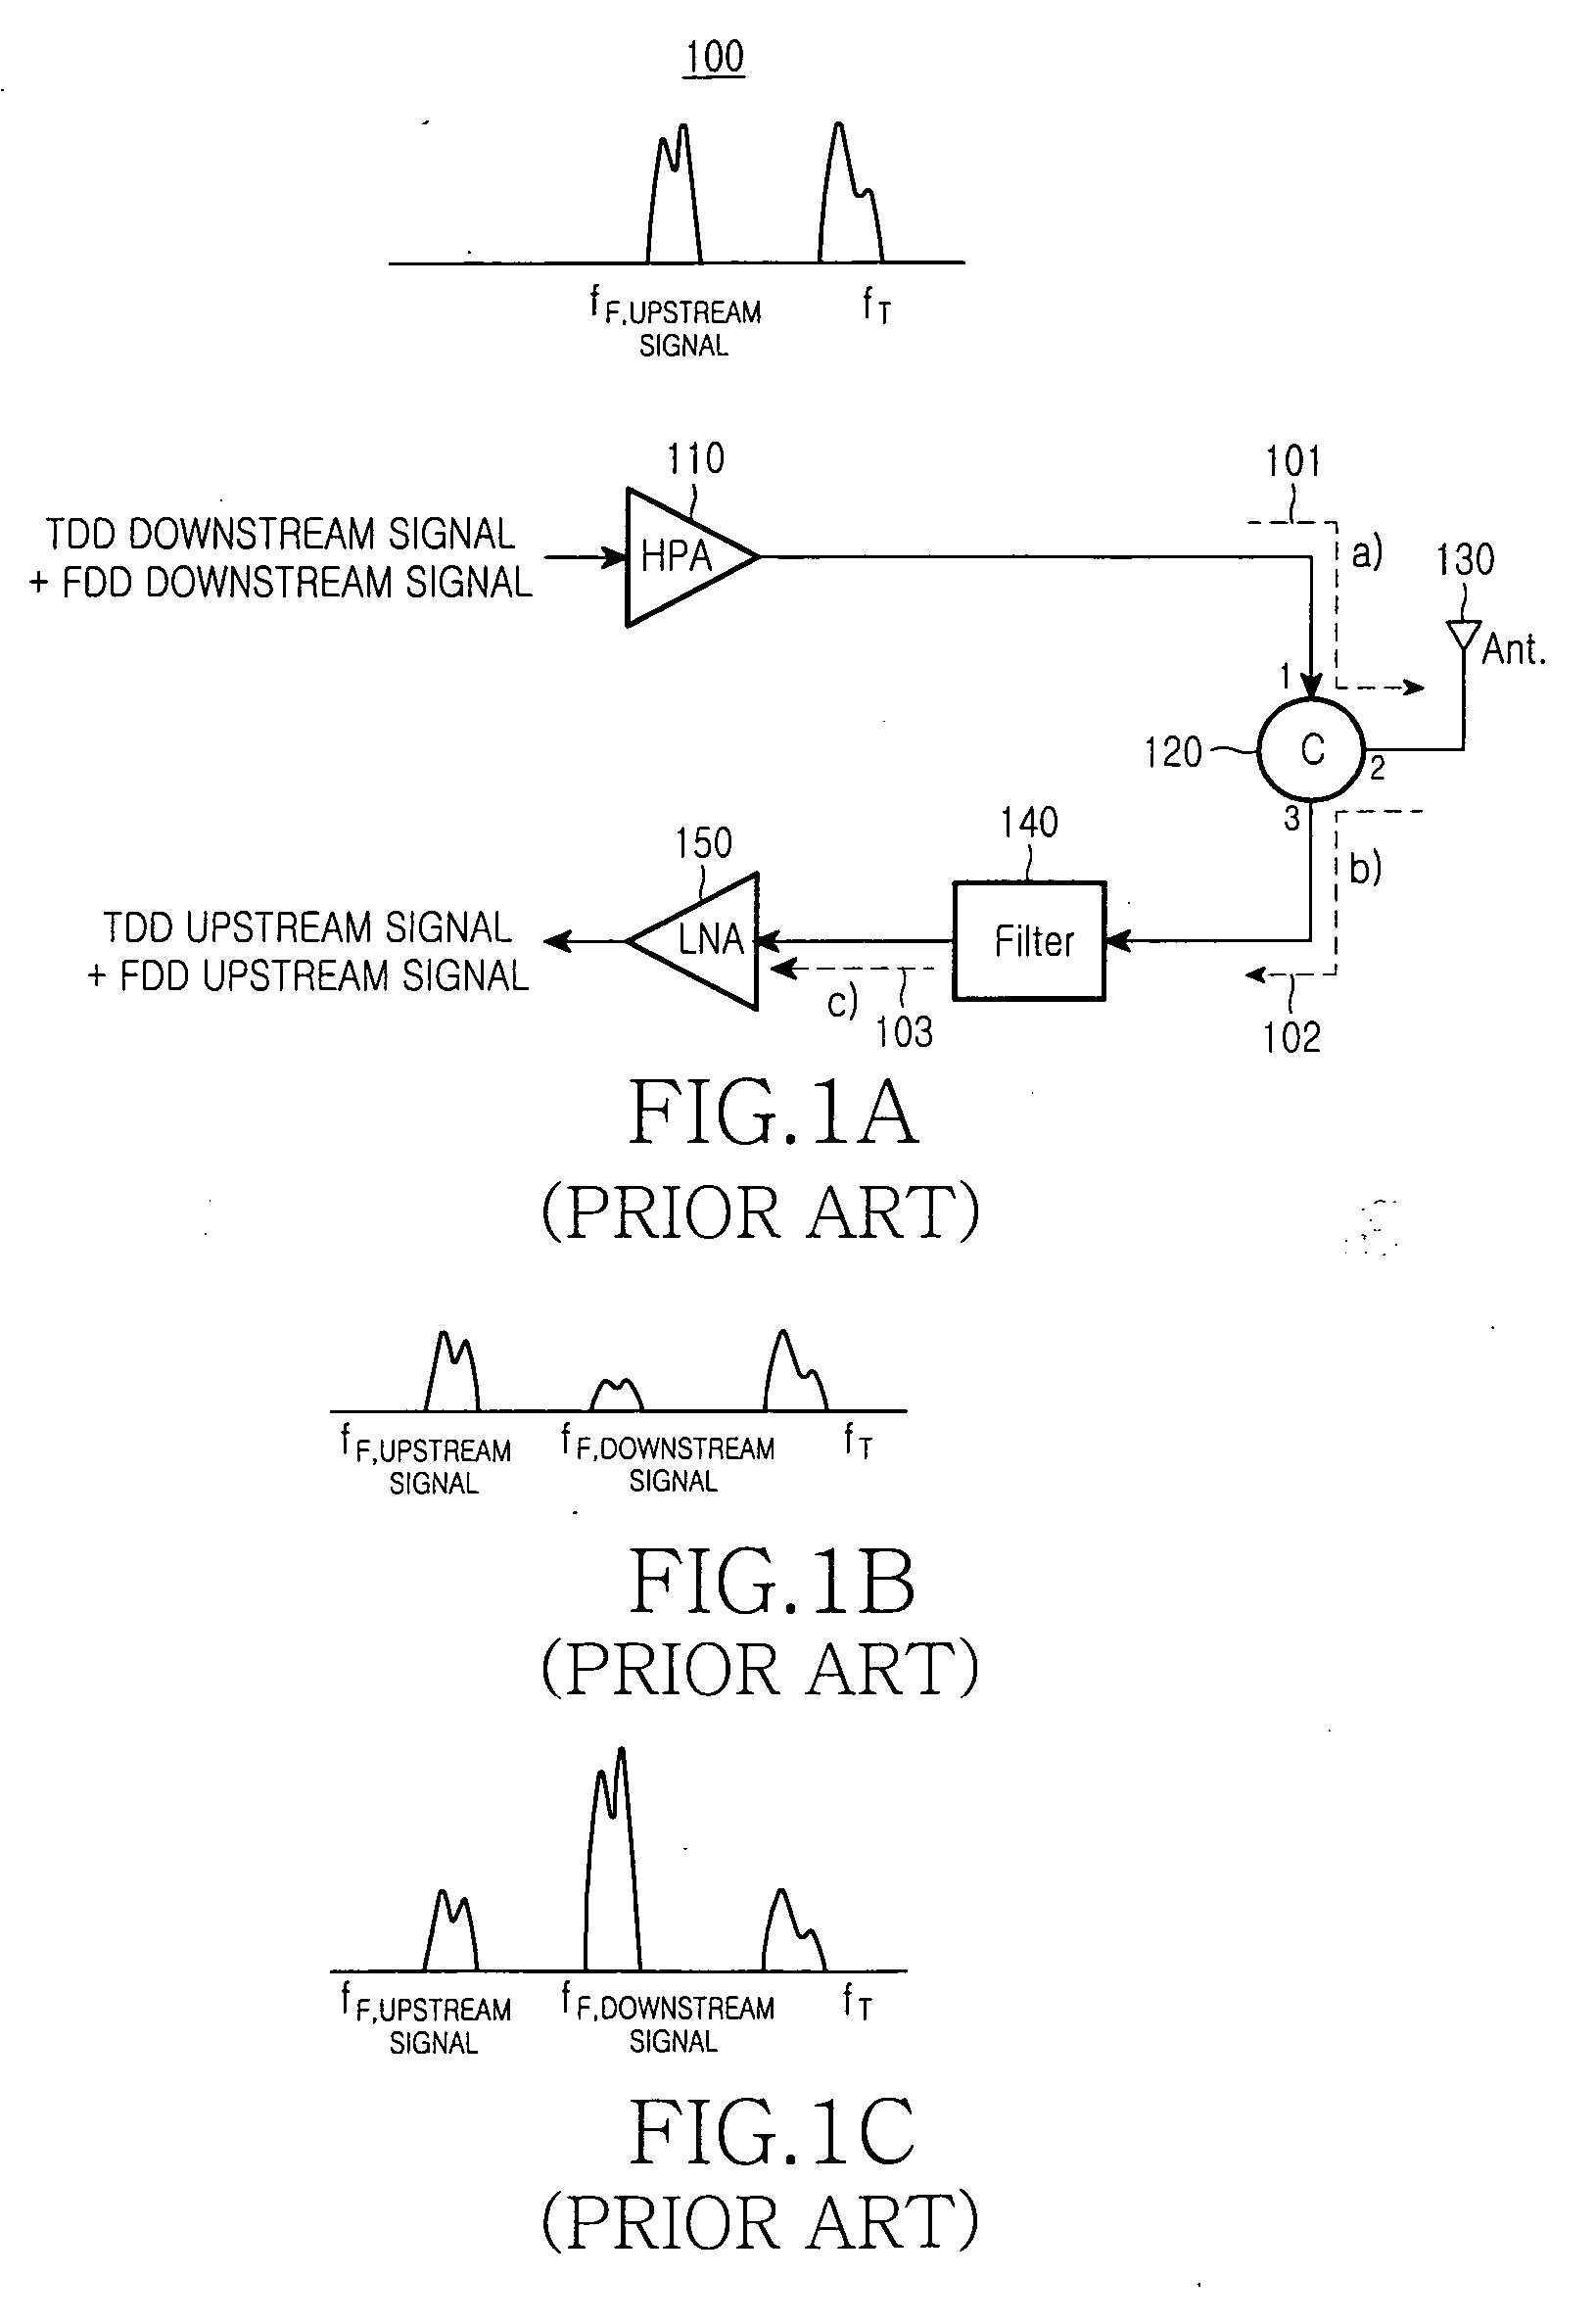 Remote access unit and optical network for bidirectional wireless communication using the same